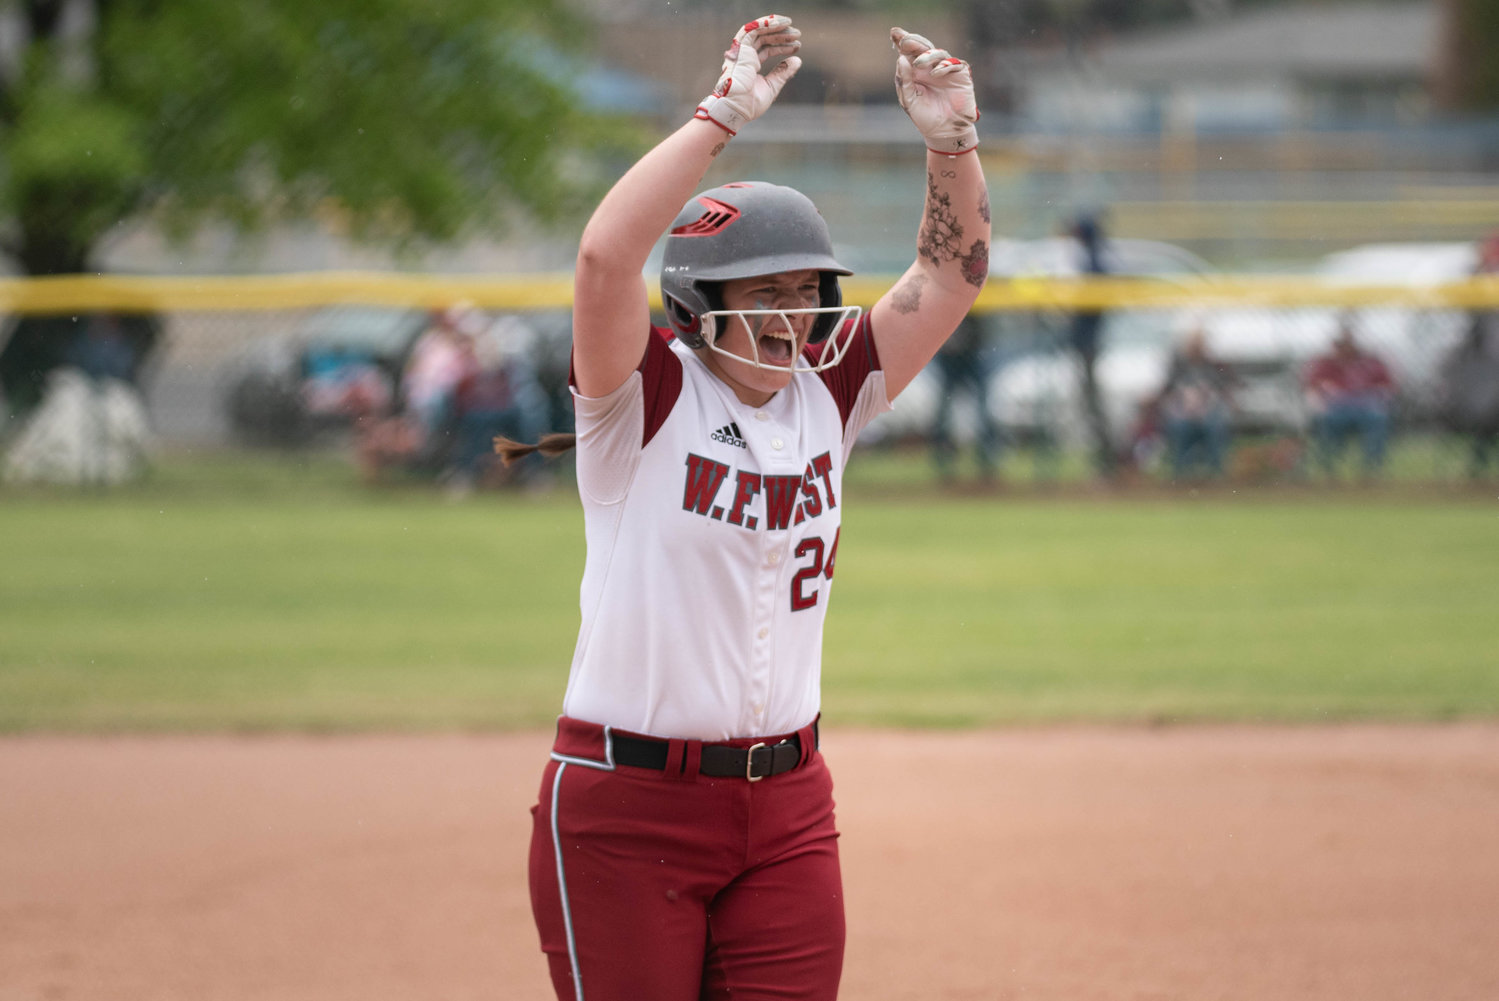 W.F. West first baseman Savannah Hawkins celebrates after a home run against Rochester in the 2A State Softball playoffs May 28 at Carlon Park in Selah.